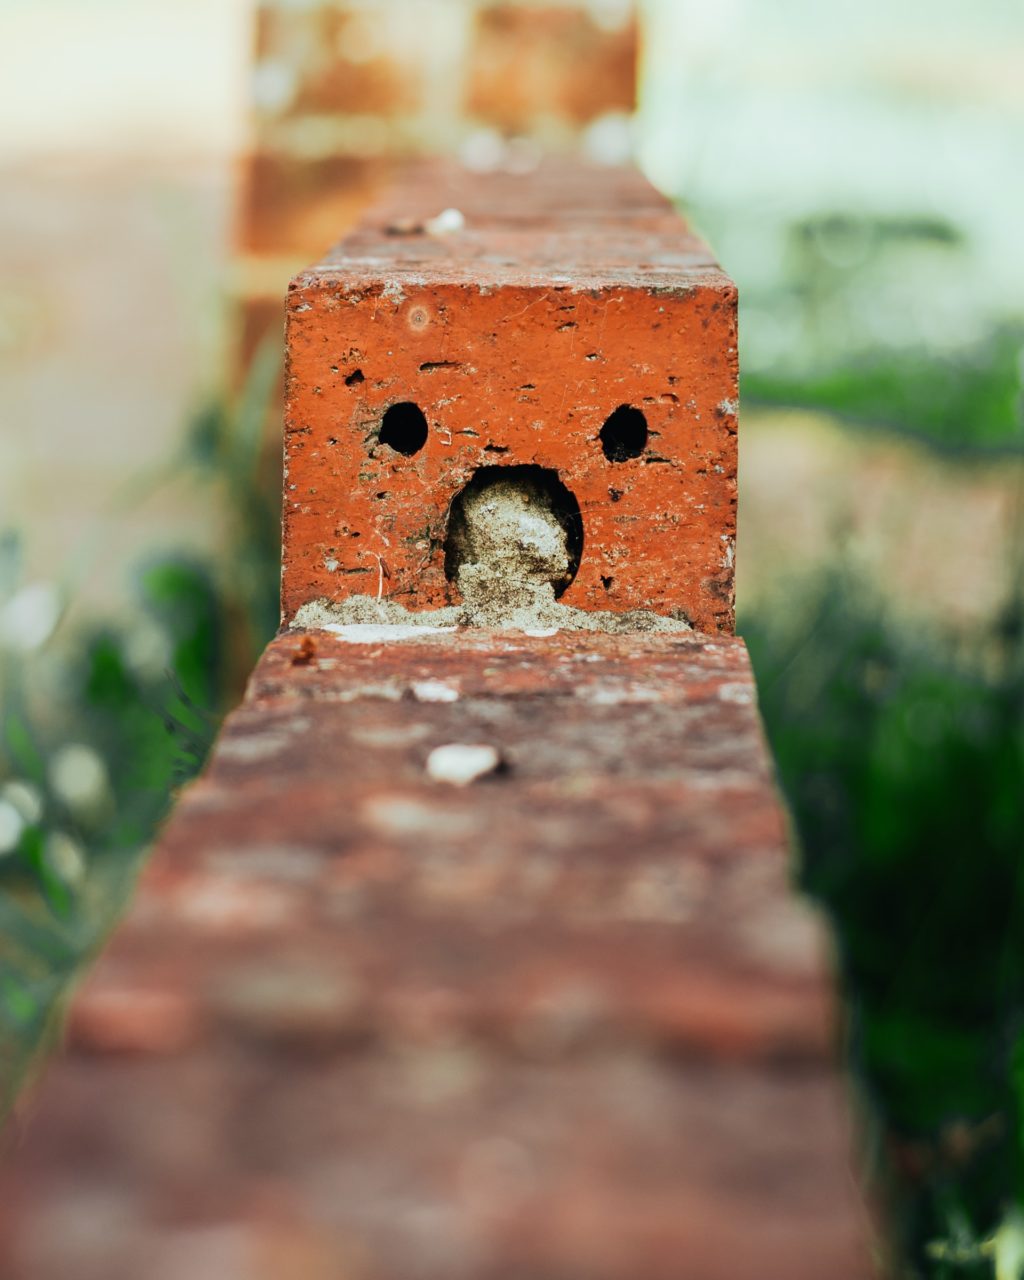 brick that looks like a face everyday objects